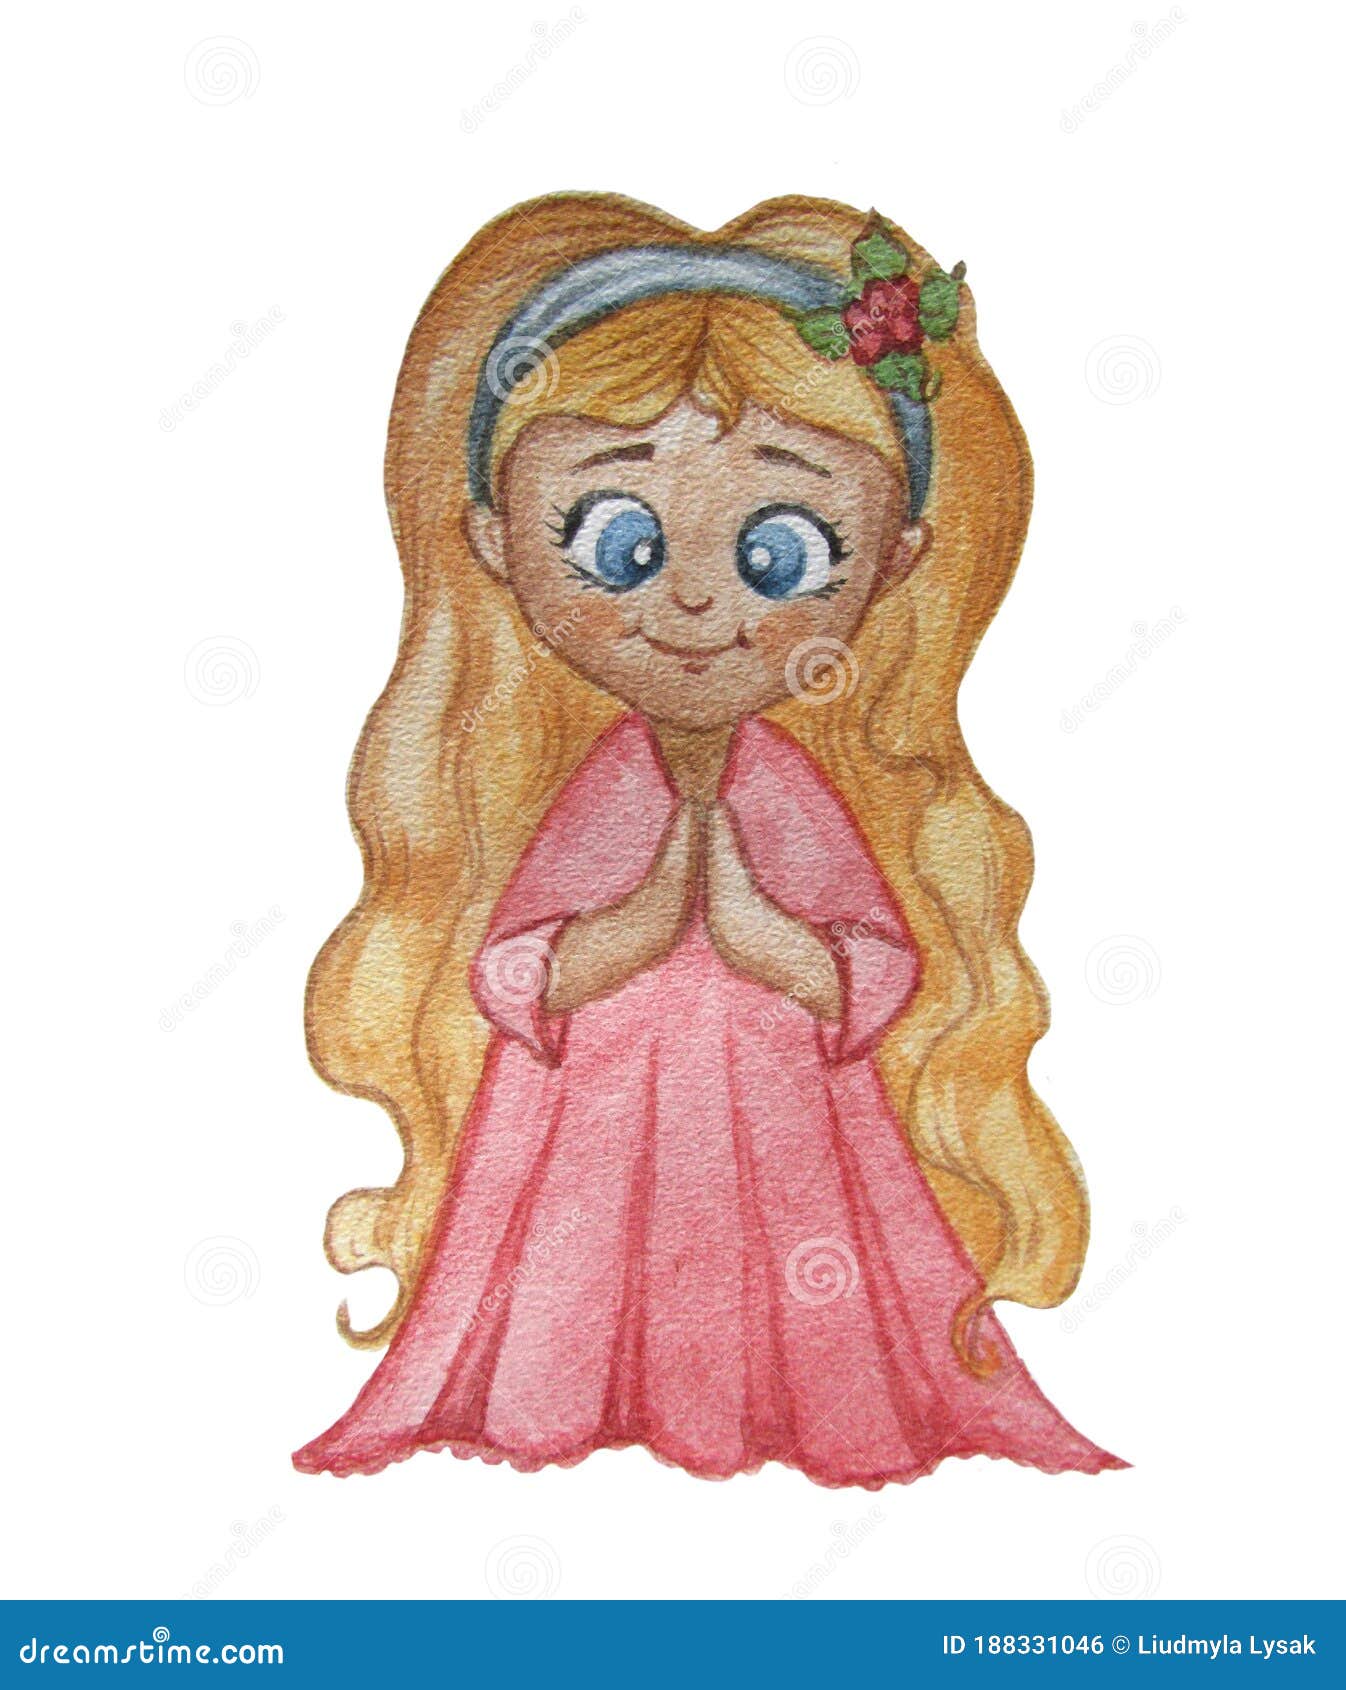 Watercolor Cute Illustration Of A Girl. Princess, Fairy Blonde With Long Hair In A Pink Dress. Hand Drawing Paints Stock Photo - Image Of Female, Drawing: 188331046